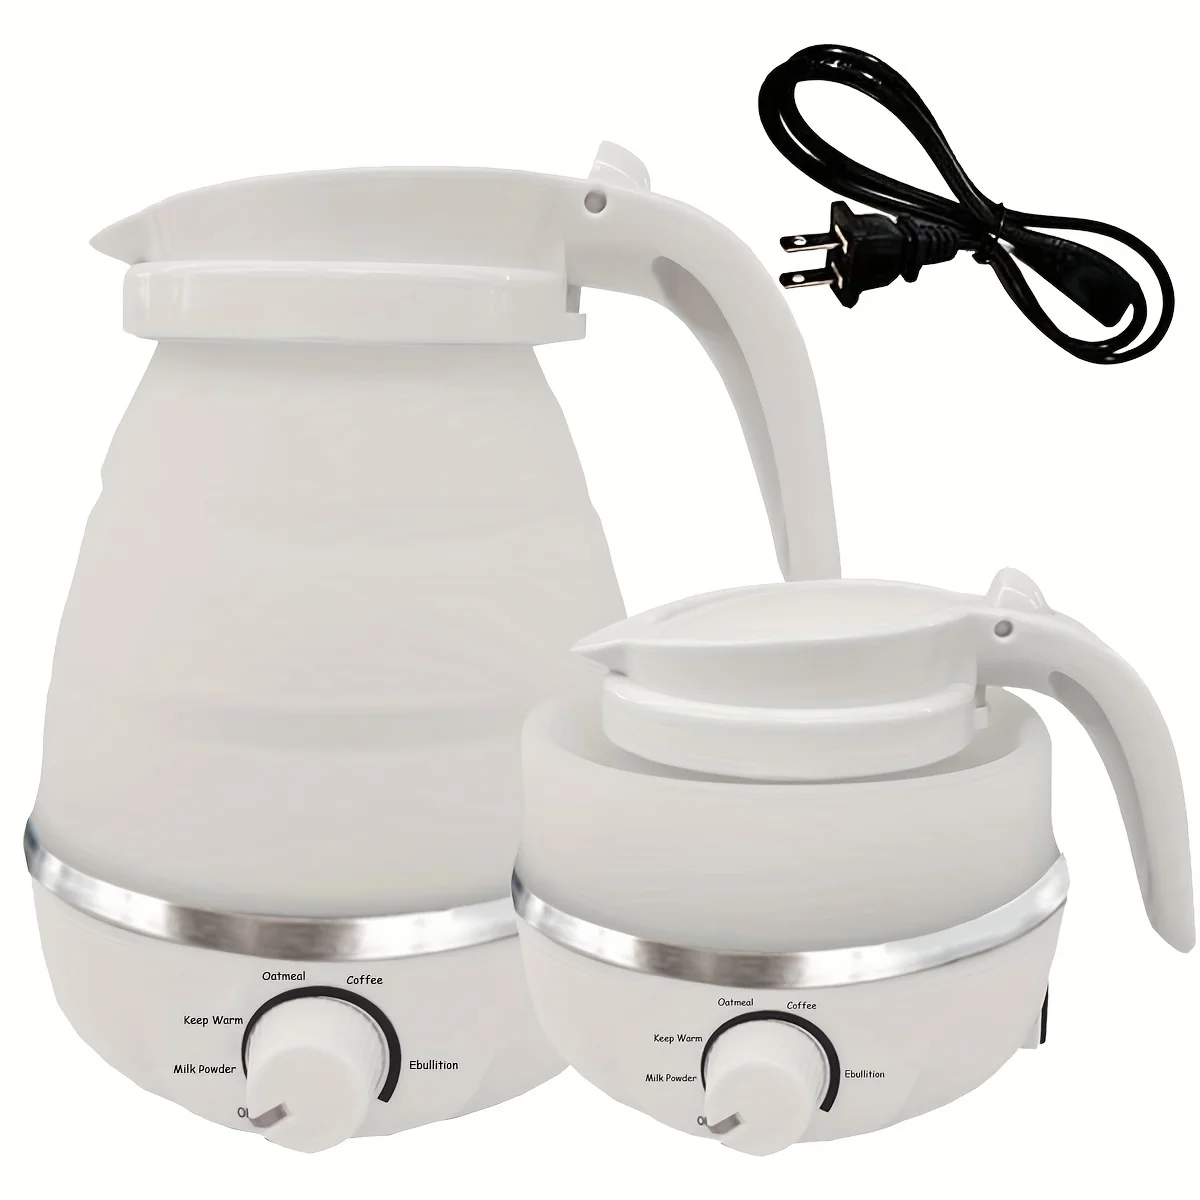 Foldable And Portable Teapot Water Heater 0.6L 600W Electric Kettle For Travel And Home Tea Pot Water Kettle Silica Gel